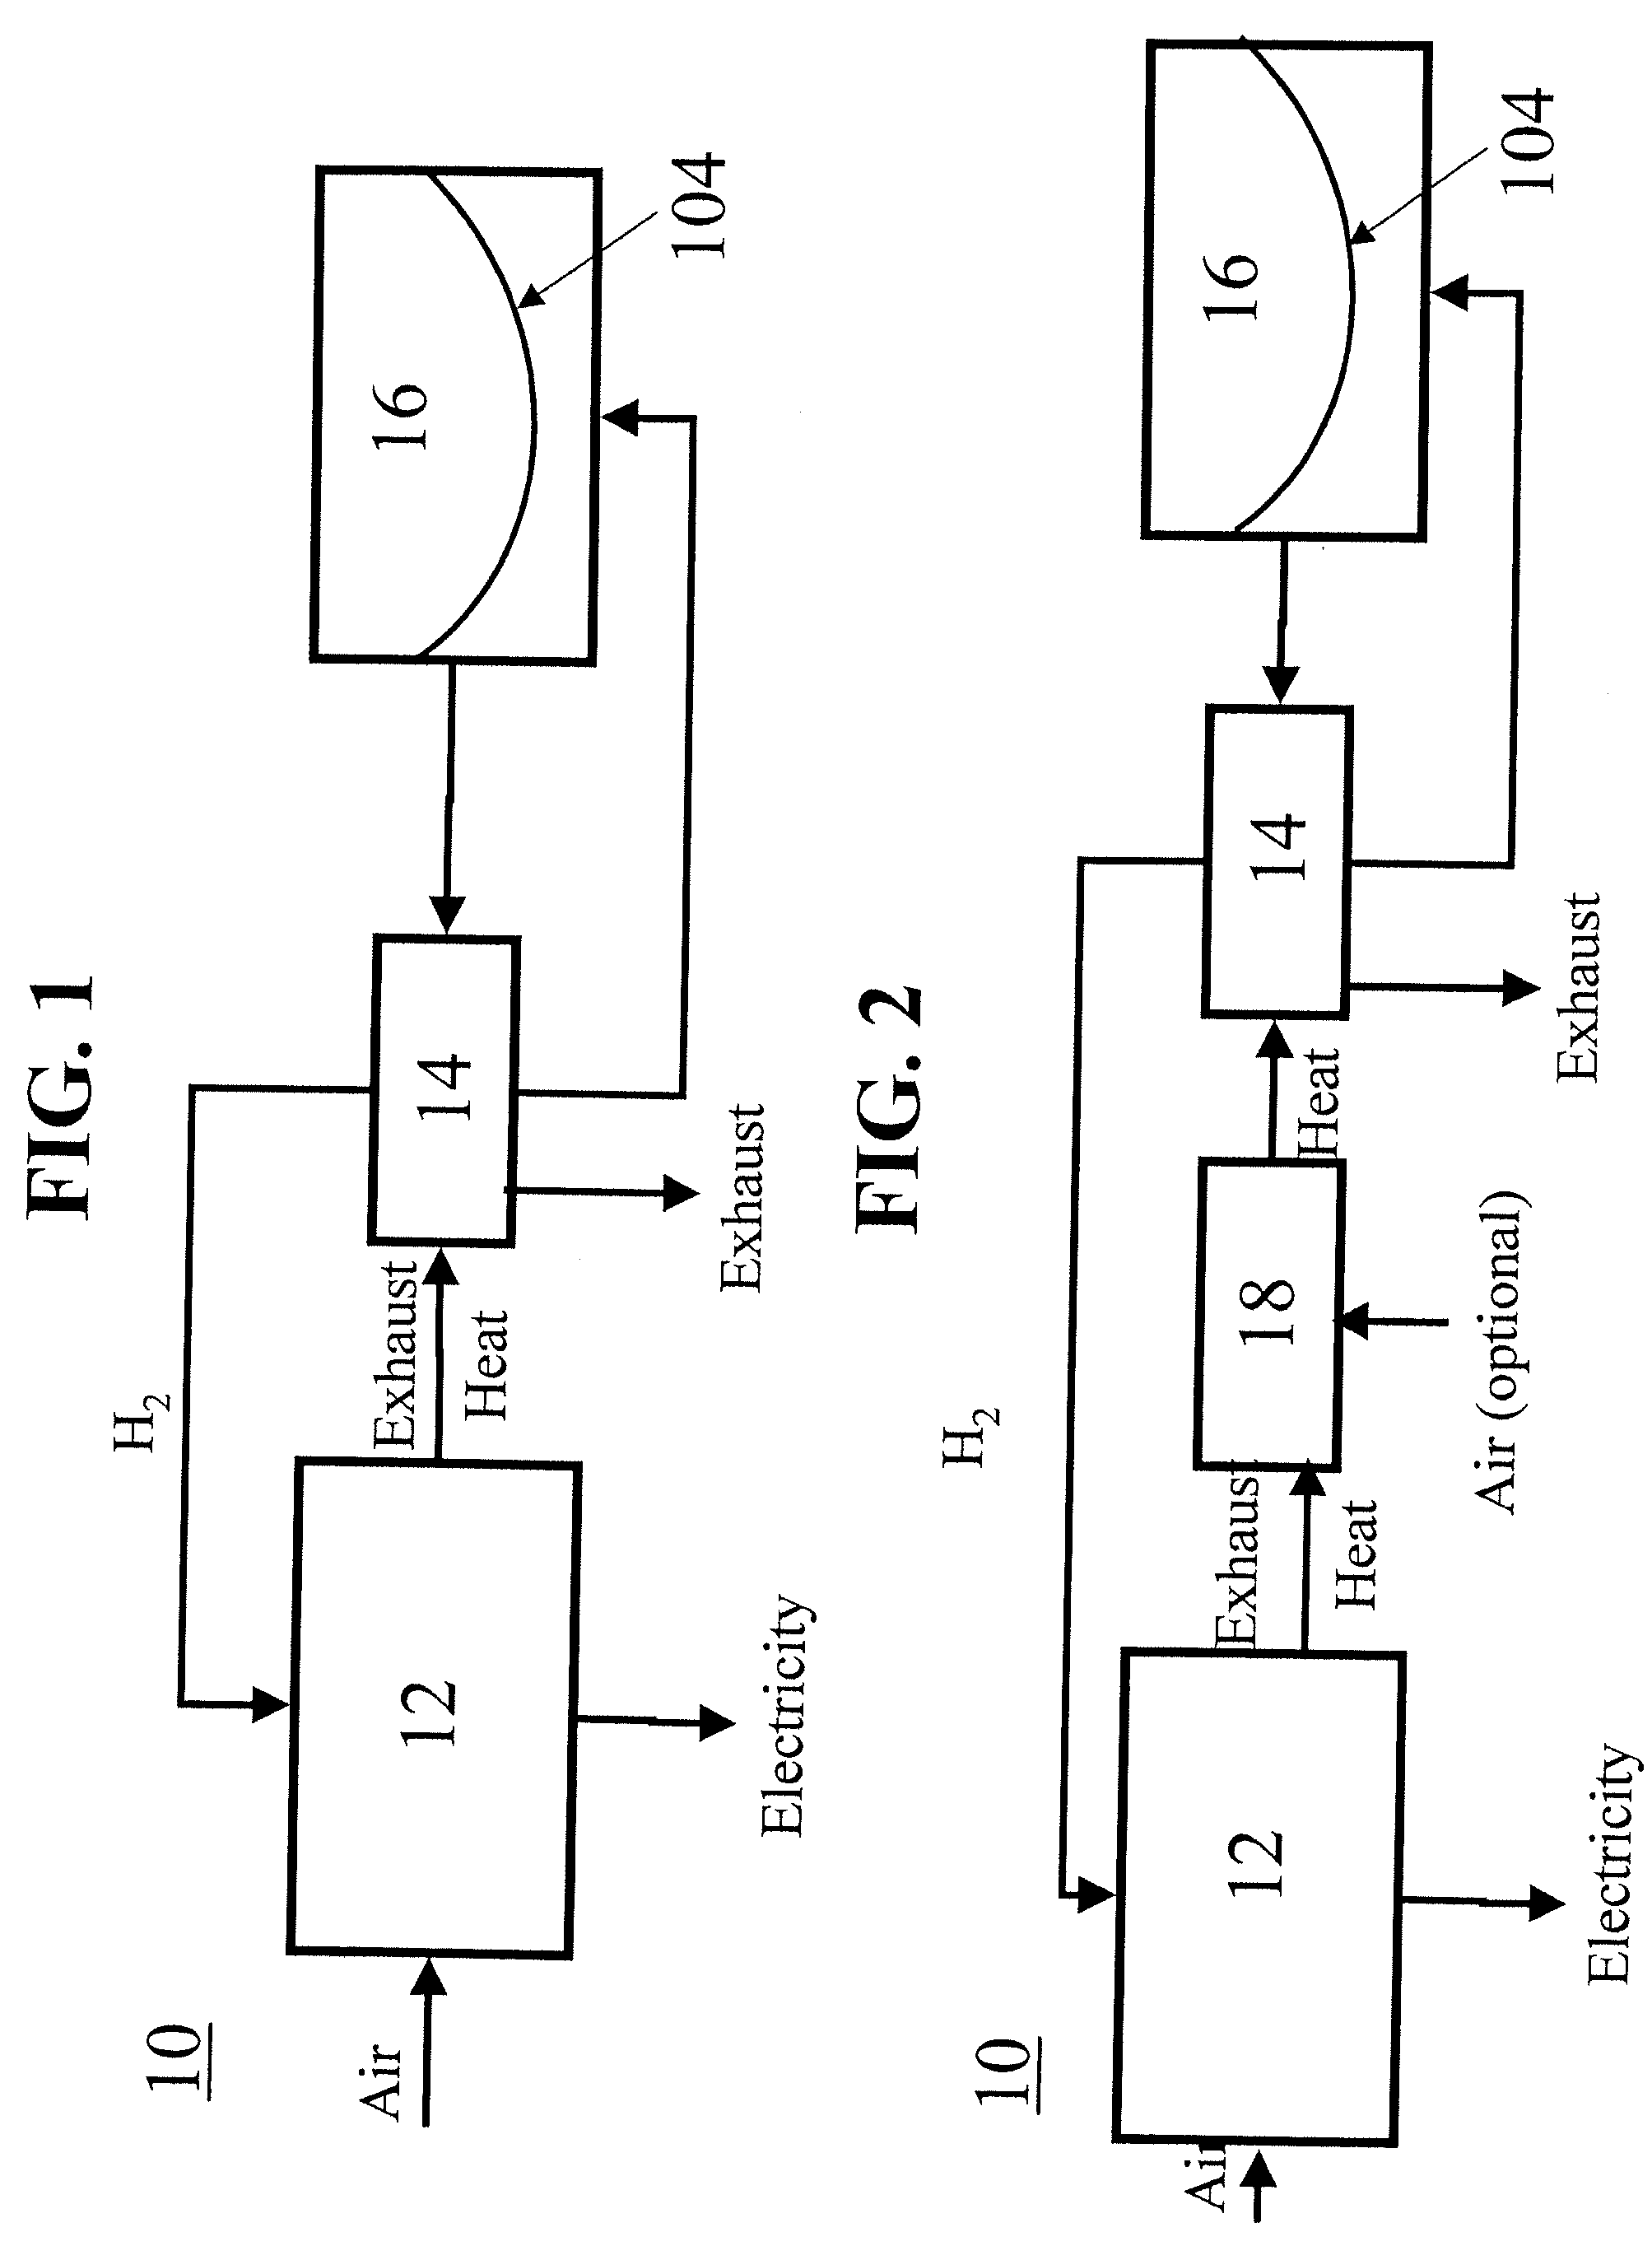 Hydrogen storage material and related system